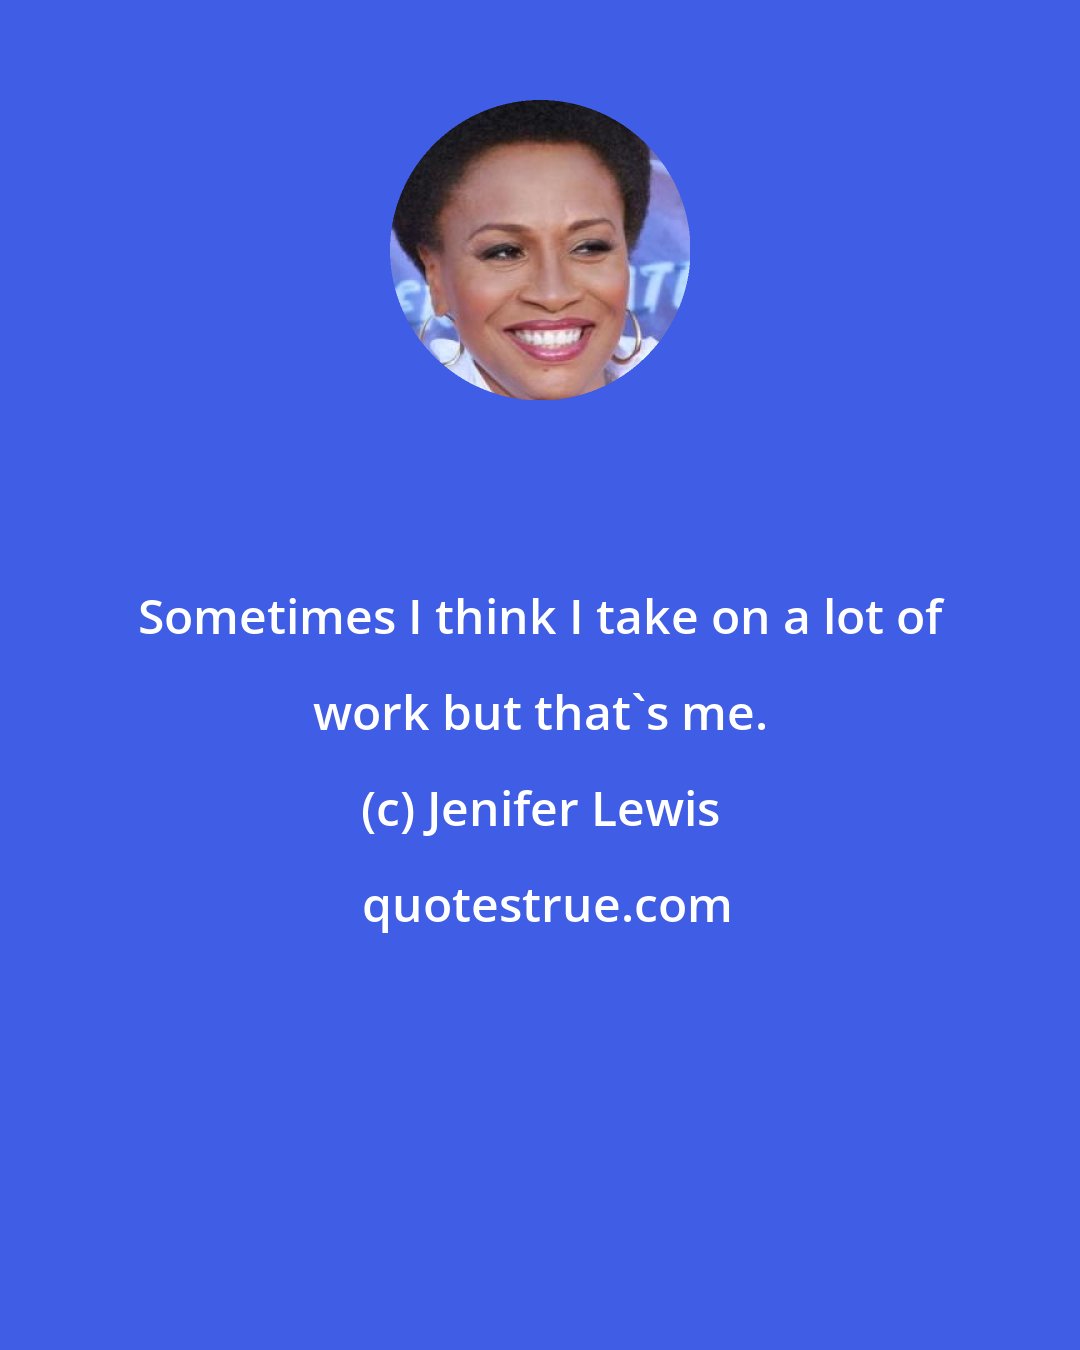 Jenifer Lewis: Sometimes I think I take on a lot of work but that's me.